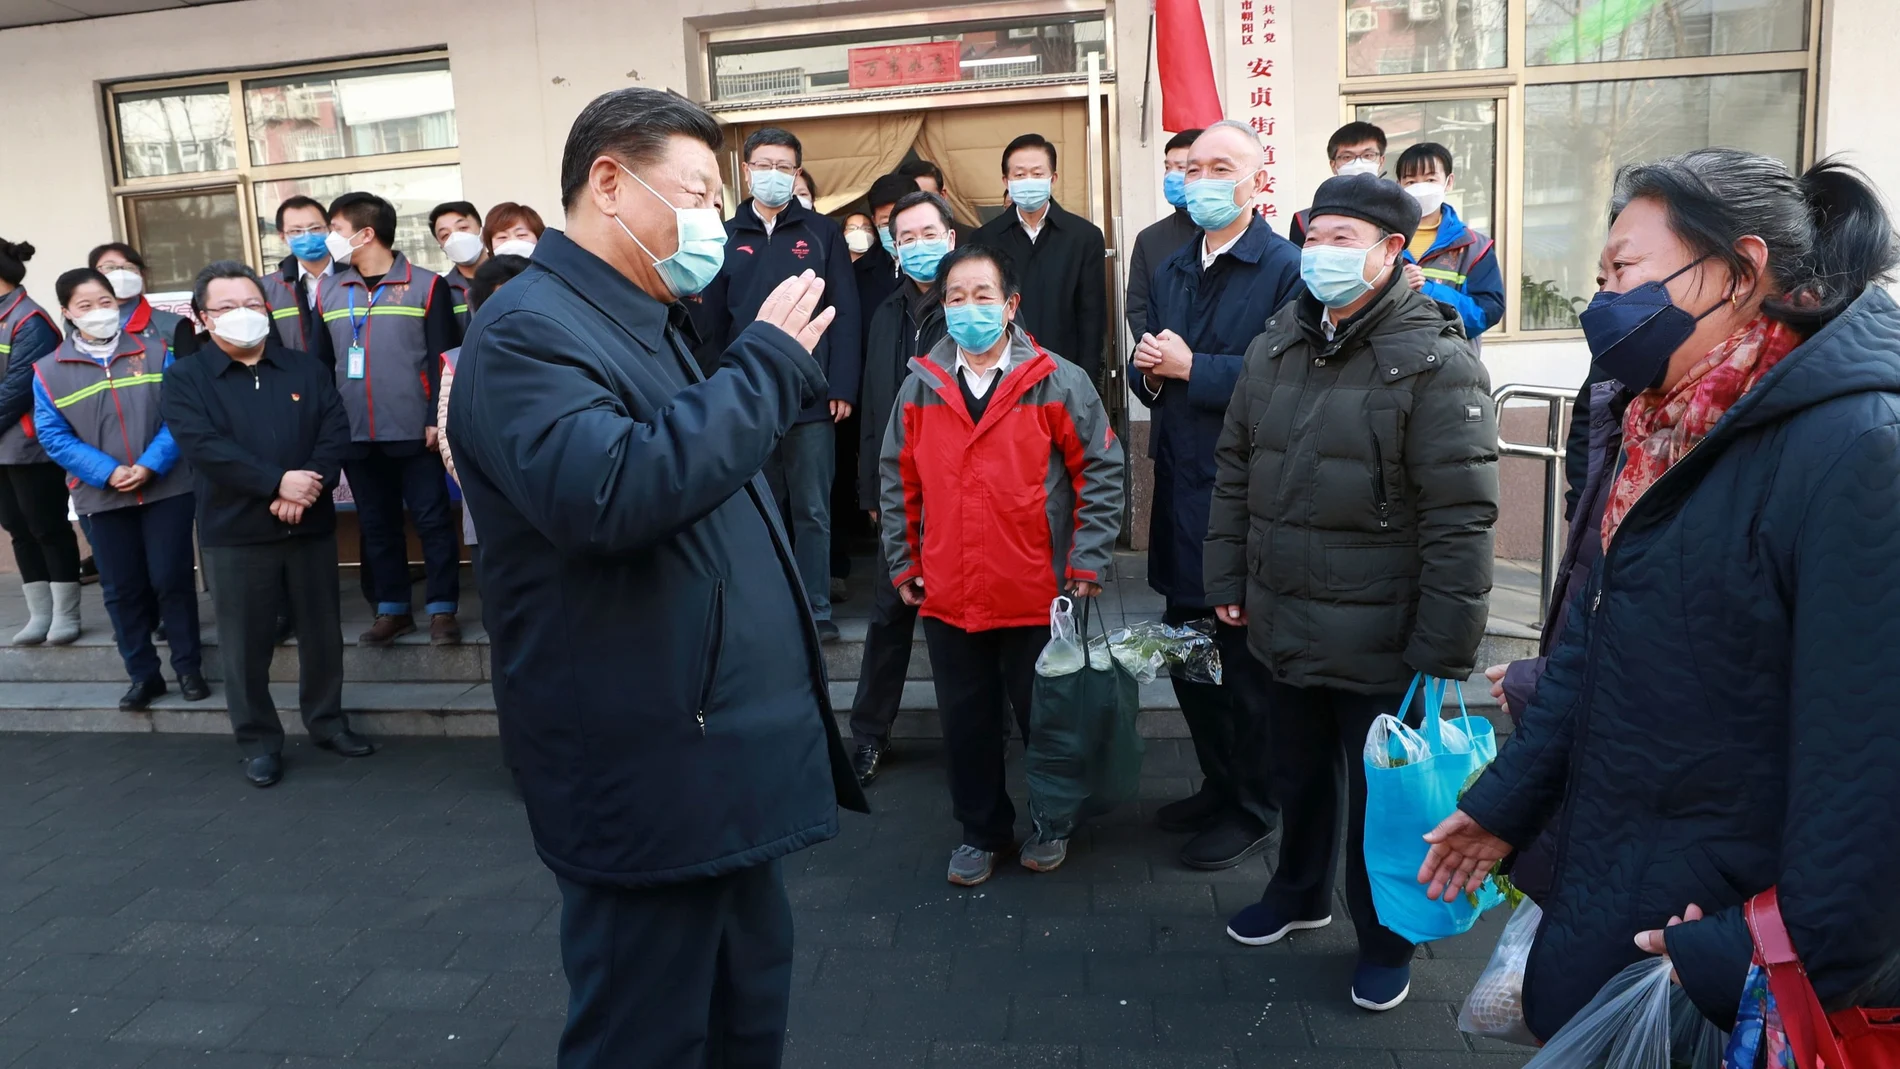 Chinese President Xi Jinping inspects the novel coronavirus prevention and control work at Anhuali Community in Beijing, China, February 10, 2020. Xinhua via REUTERS ATTENTION EDITORS - THIS IMAGE WAS PROVIDED BY A THIRD PARTY. CHINA OUT. NO RESALES. NO ARCHIVES.